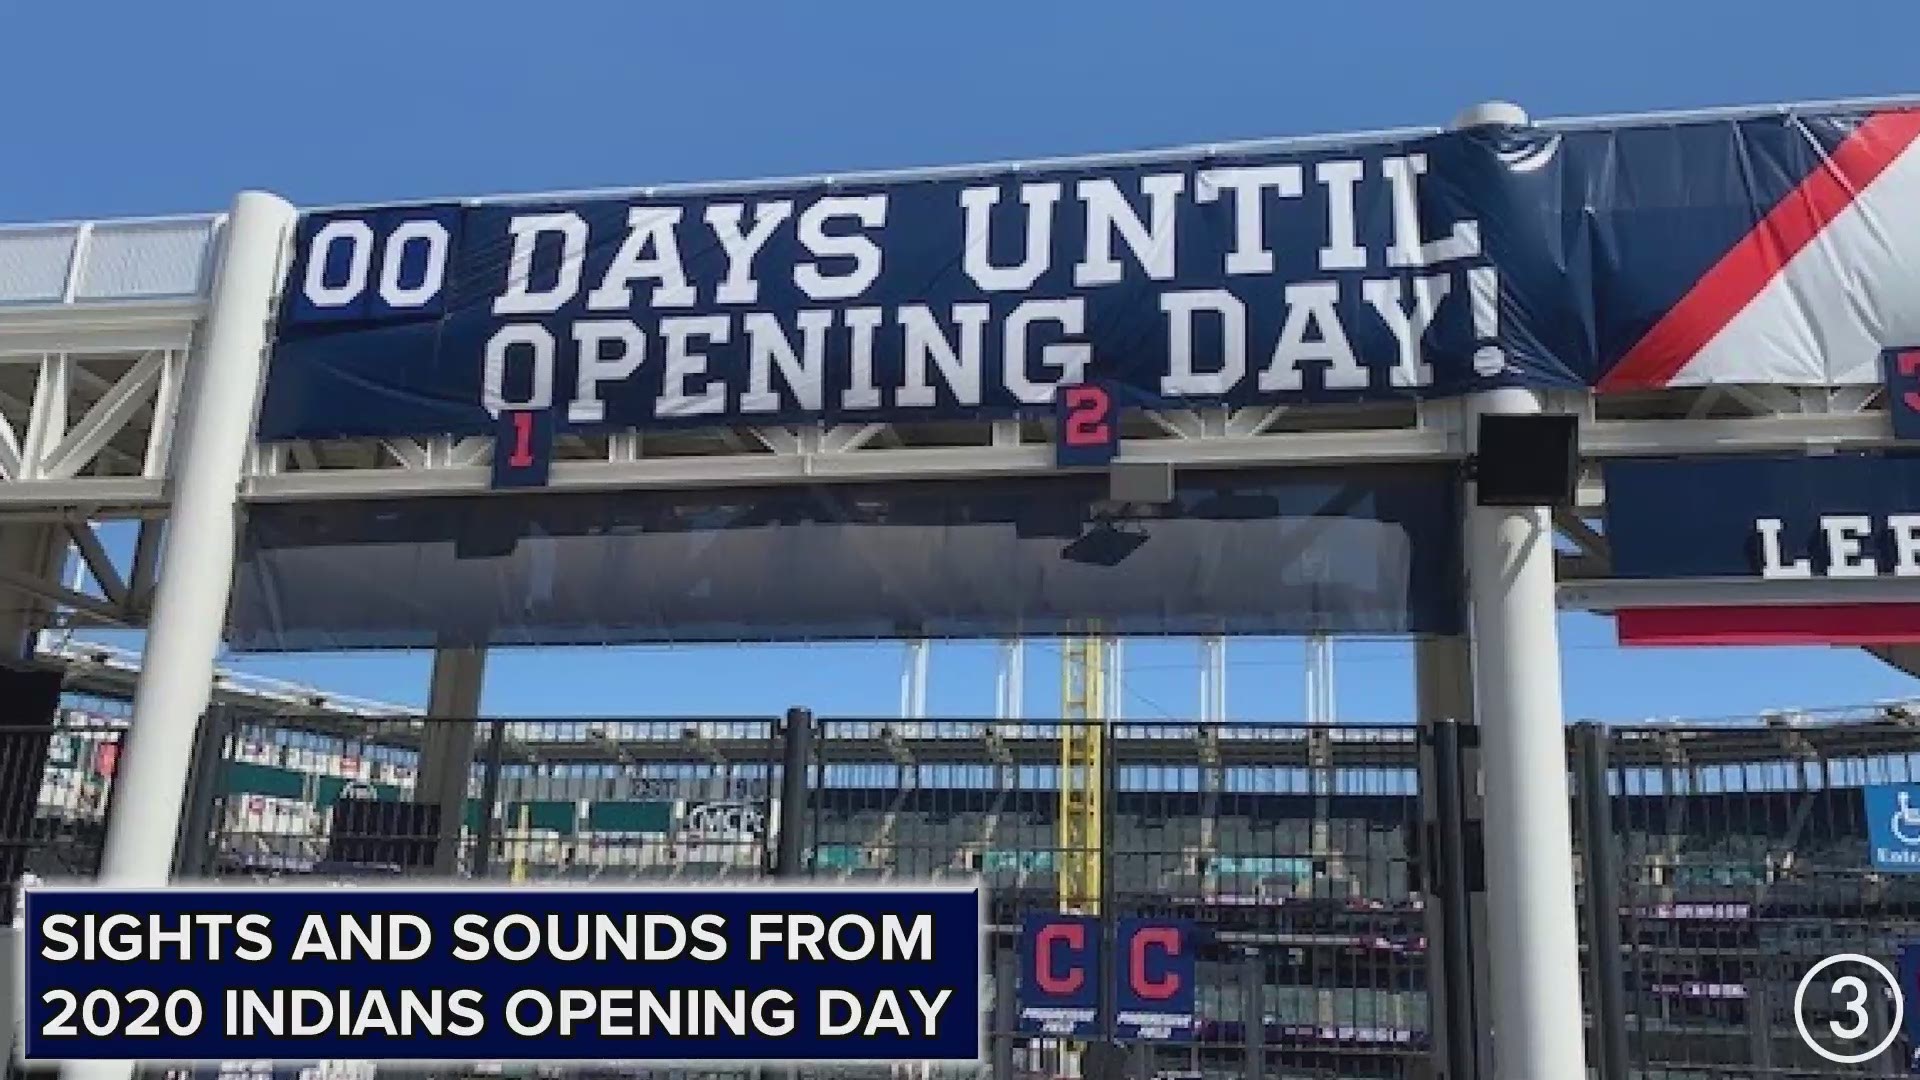 It's a much different Opening Day for the Tribe! 
Tonight, the Cleveland Indians are opening the 2020 season against the Kansas City Royals at Progressive Field.